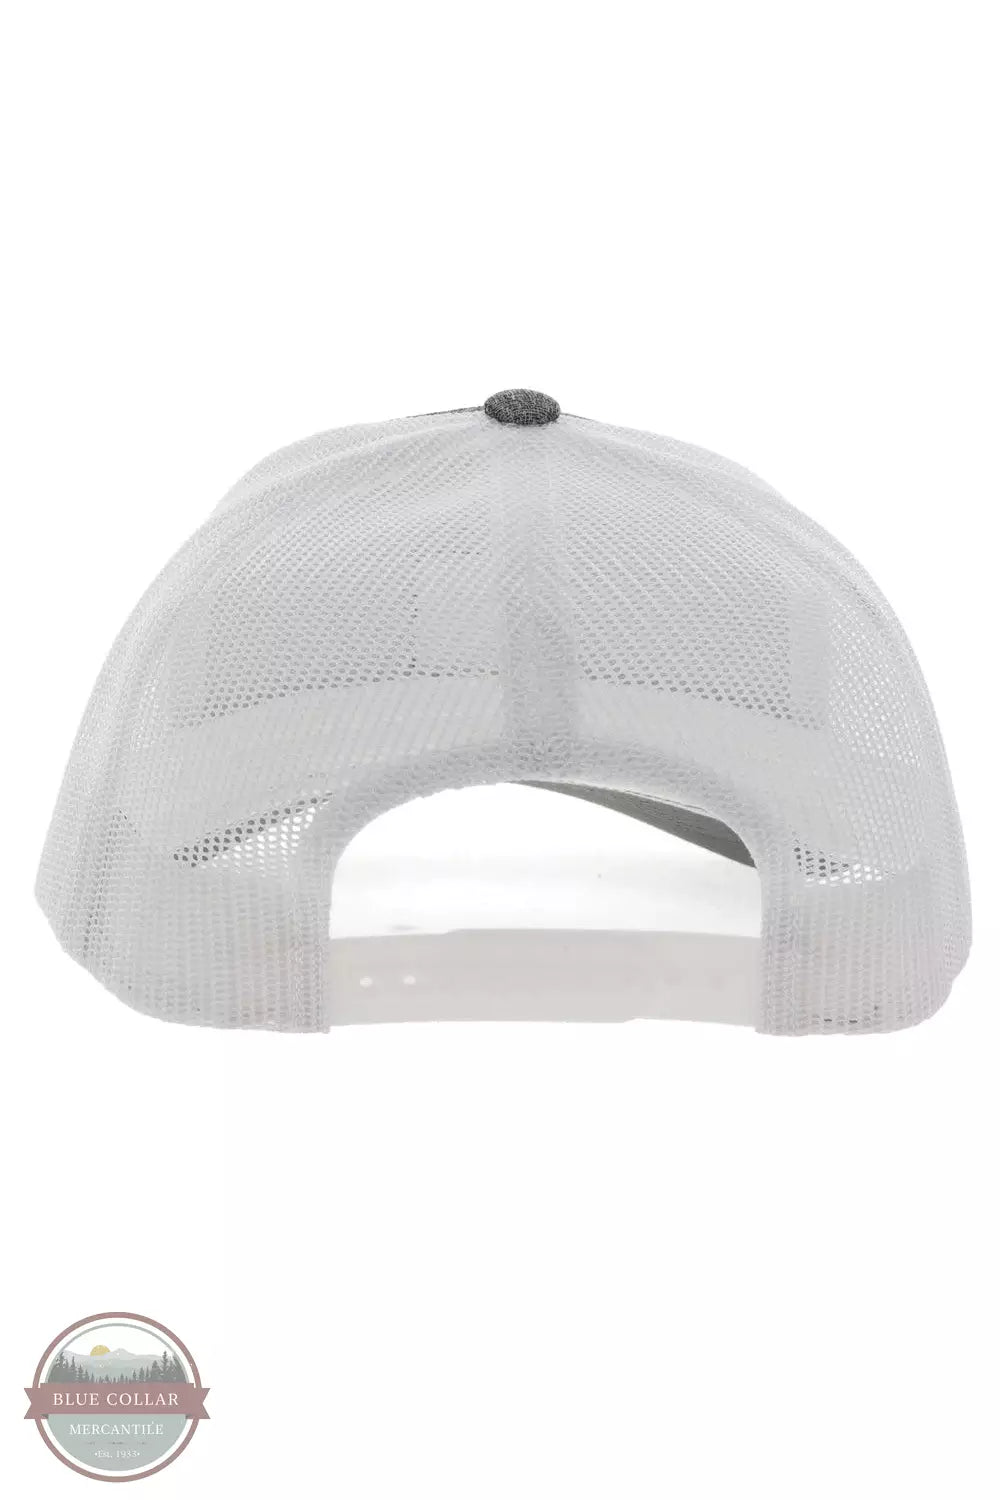 Hooey 2234T-GYWH Boxy Cap in Grey / White Back View